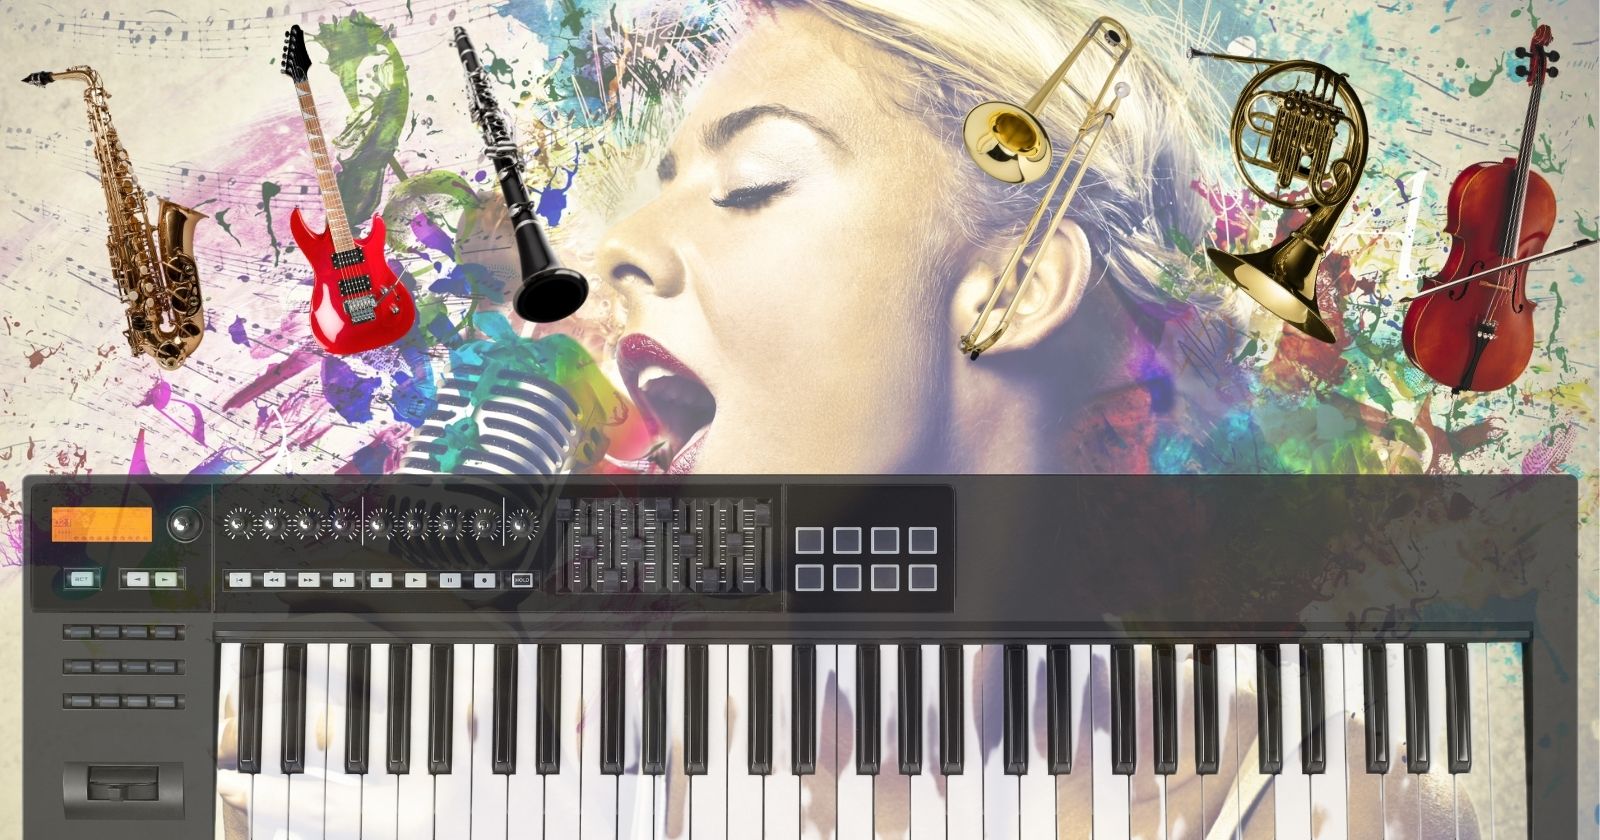 Can You Play Any Instrument On A Midi Keyboard